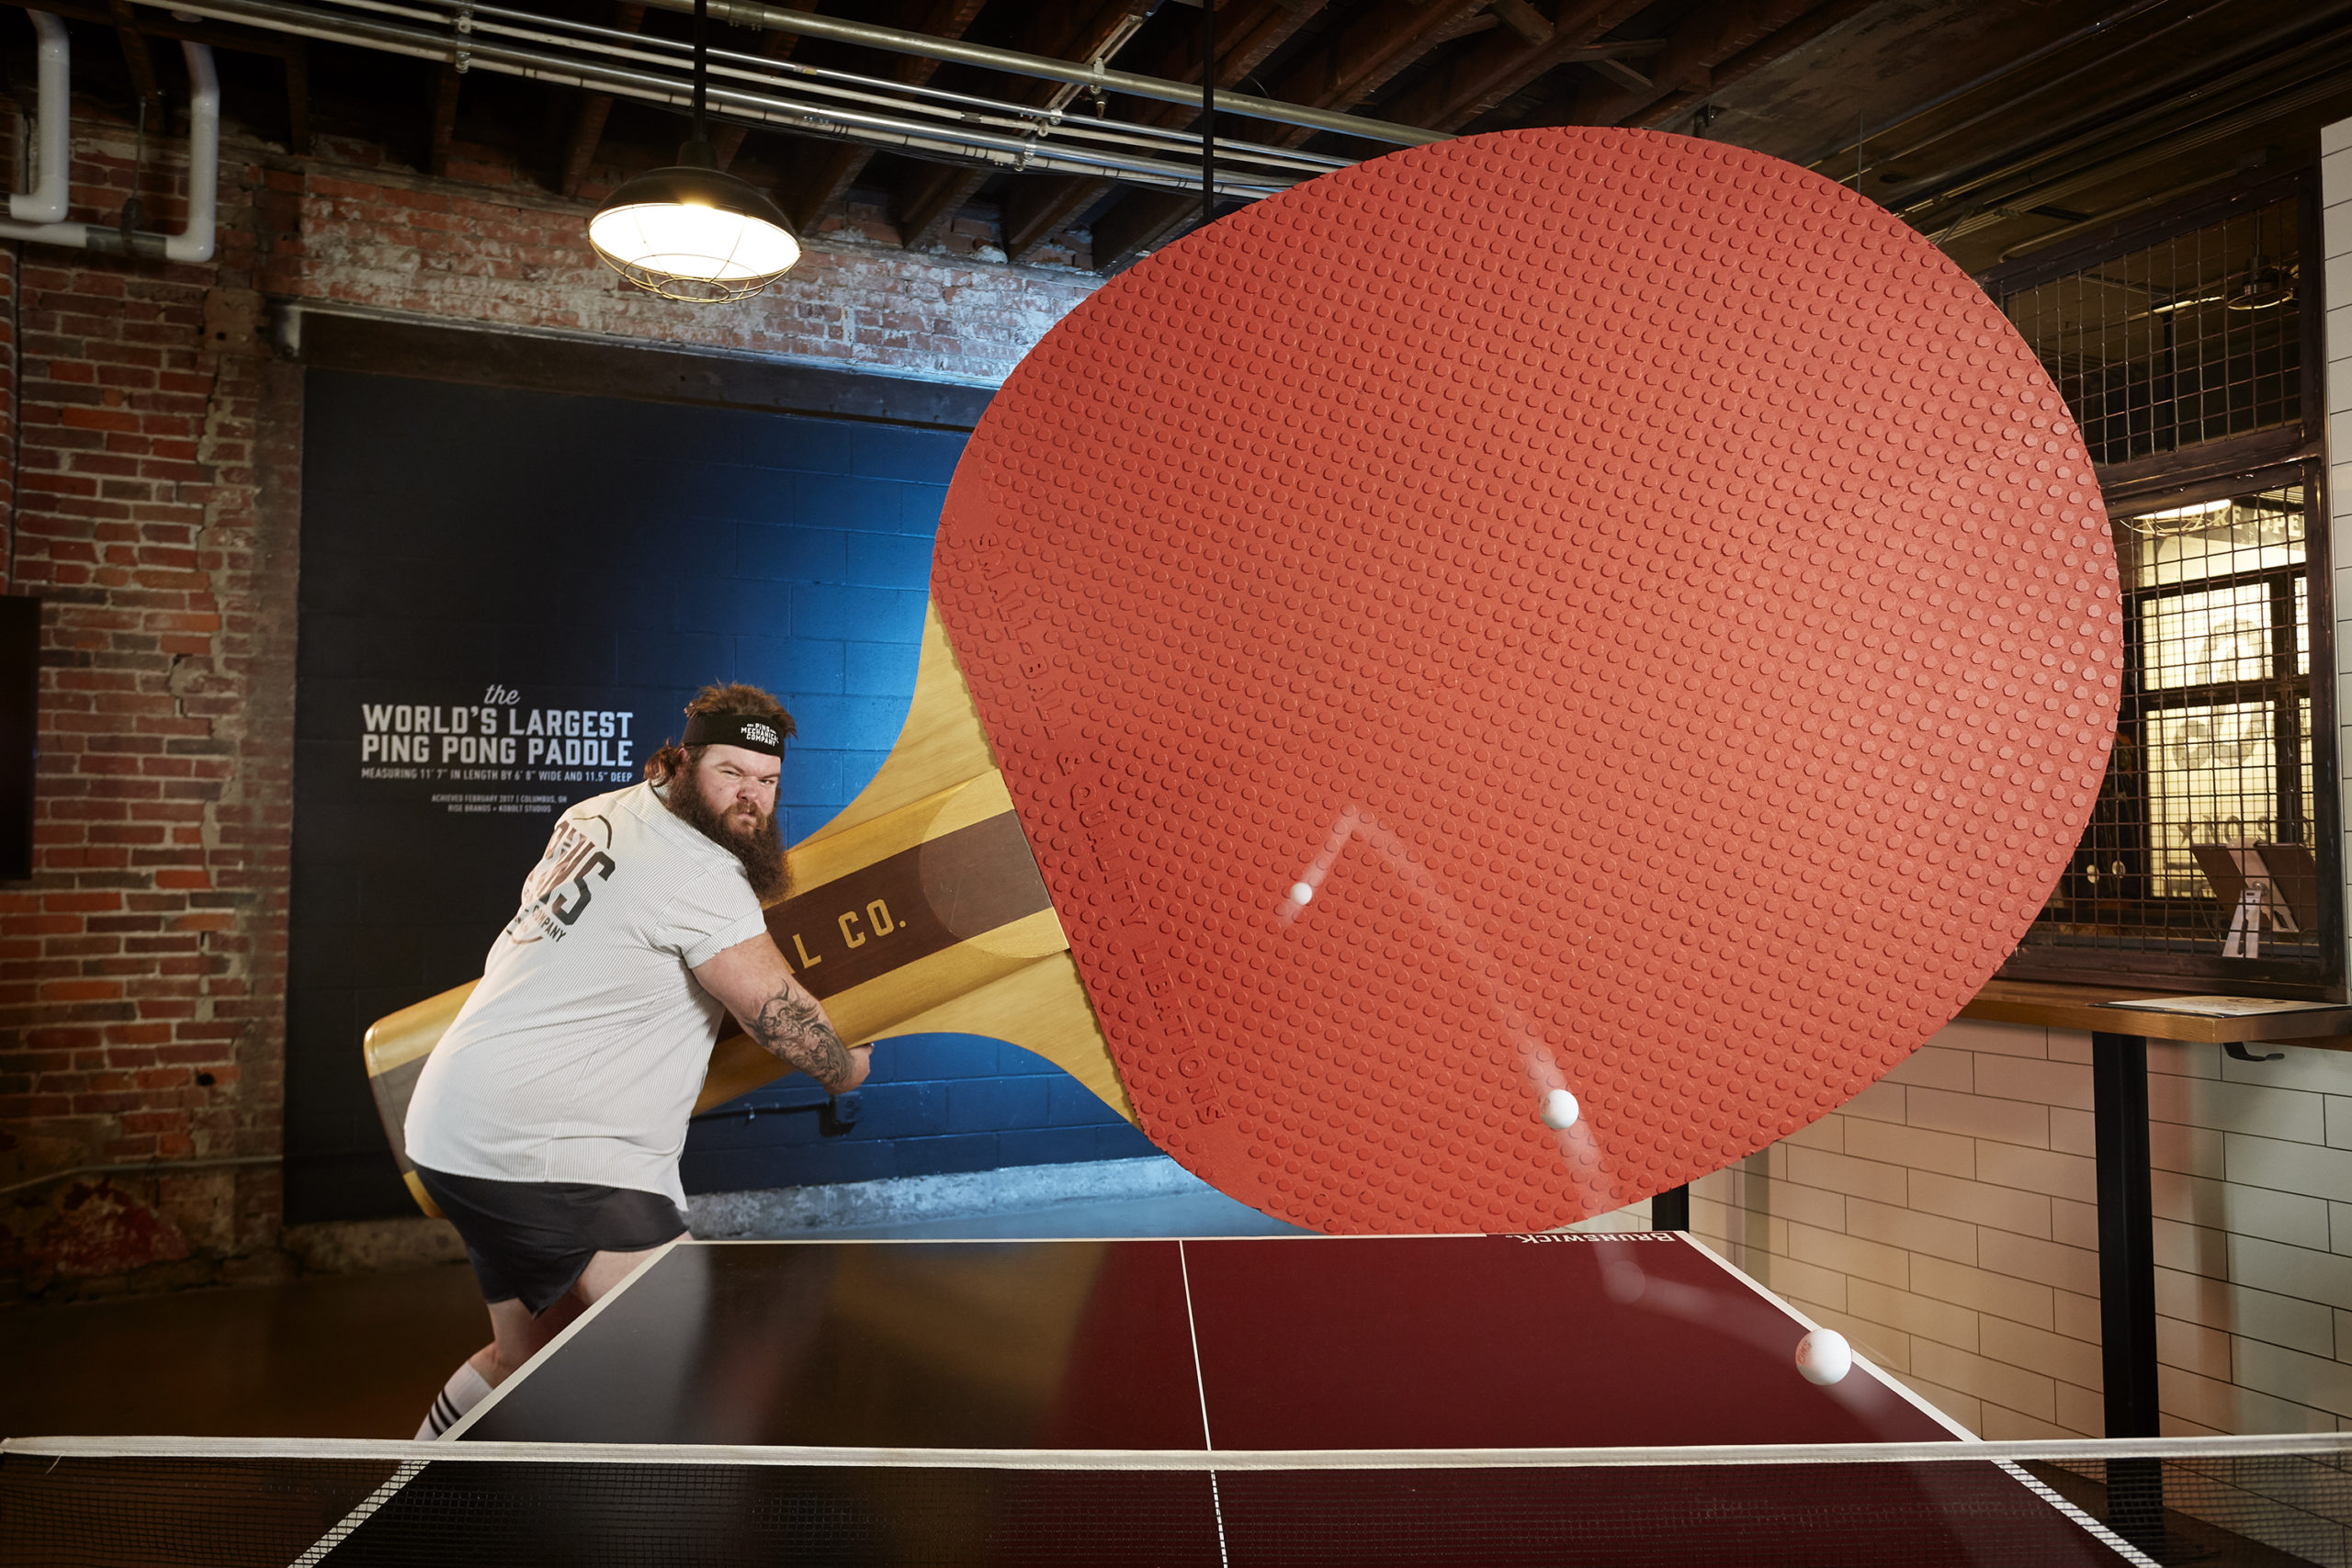 Largest Ping Pong Bat Guinness World Records 2020 Photo Credit: Kevin Scott Ramos/Guinness World Records